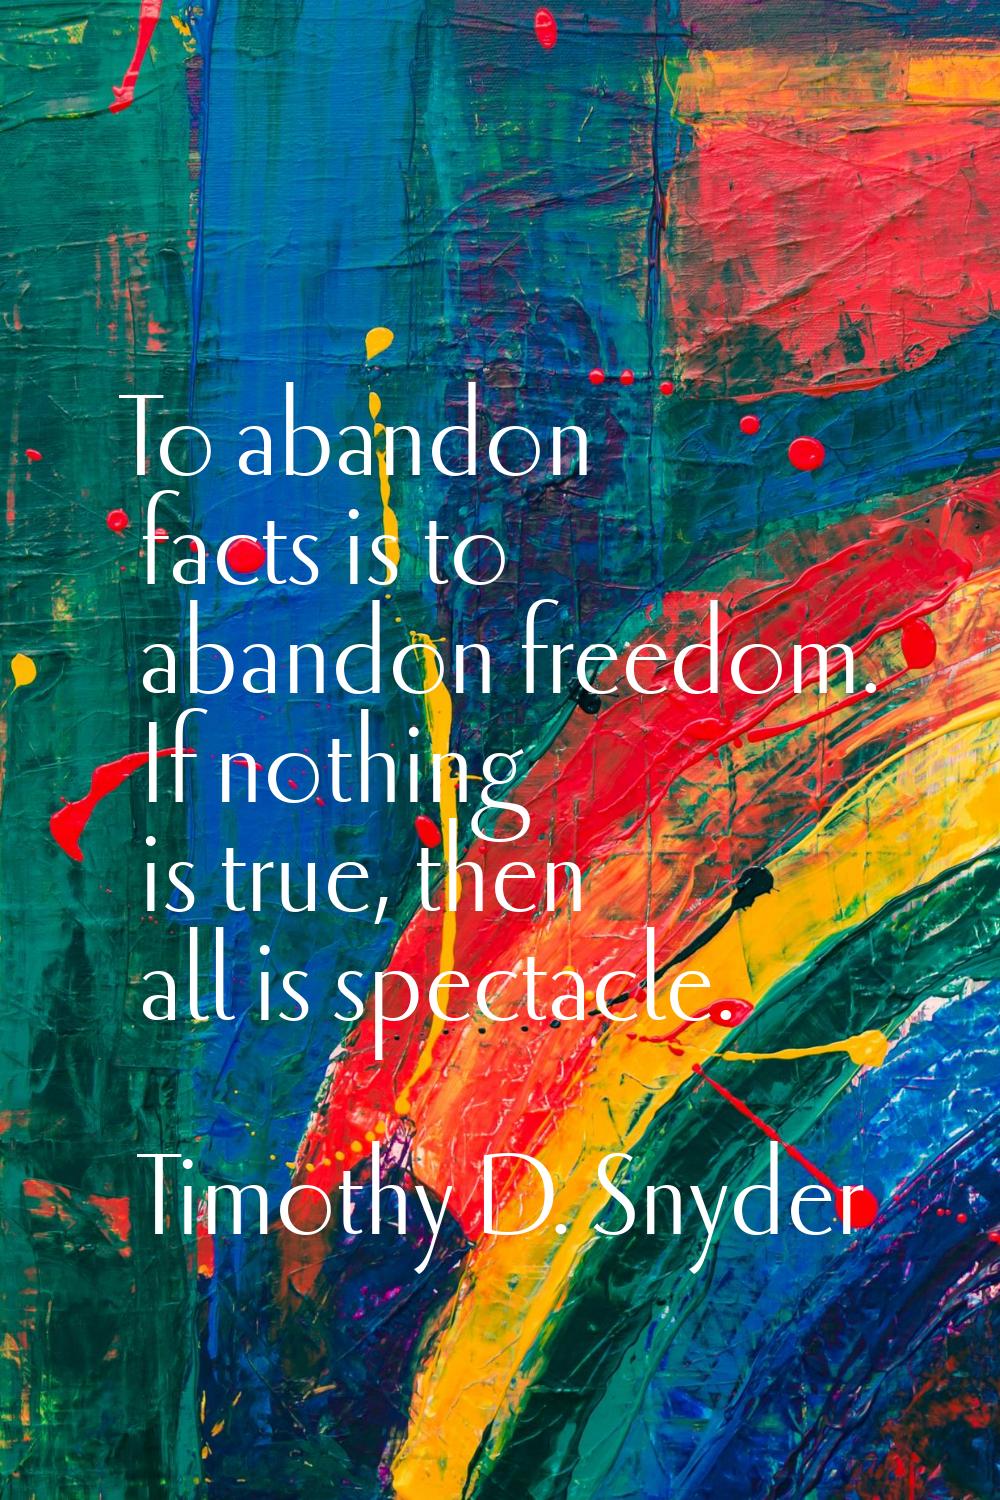 To abandon facts is to abandon freedom. If nothing is true, then all is spectacle.